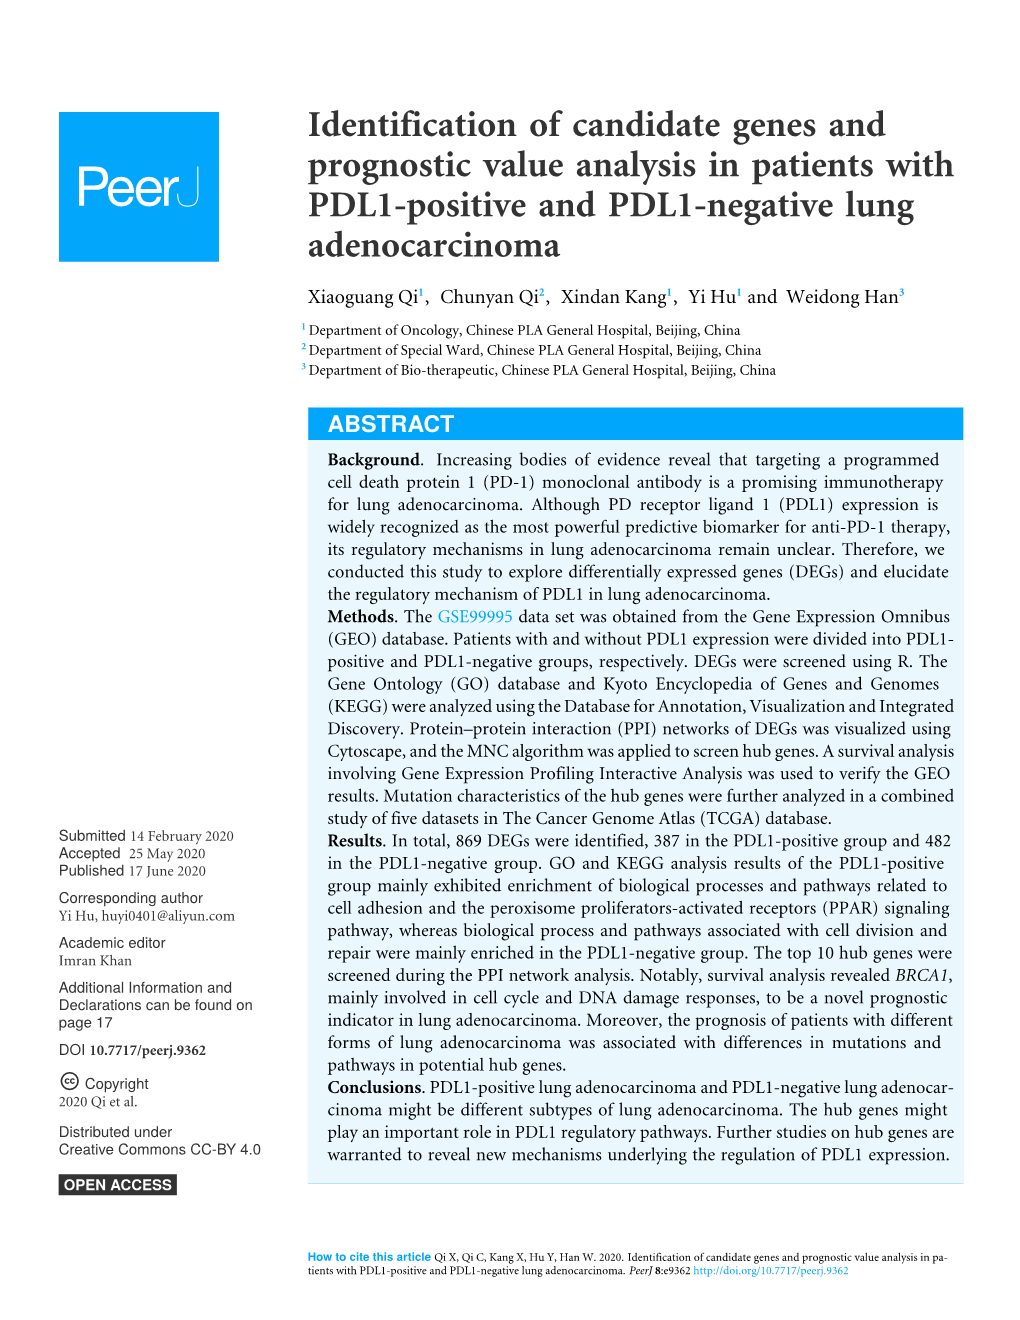 Identification of Candidate Genes and Prognostic Value Analysis in Patients with PDL1-Positive and PDL1-Negative Lung Adenocarcinoma